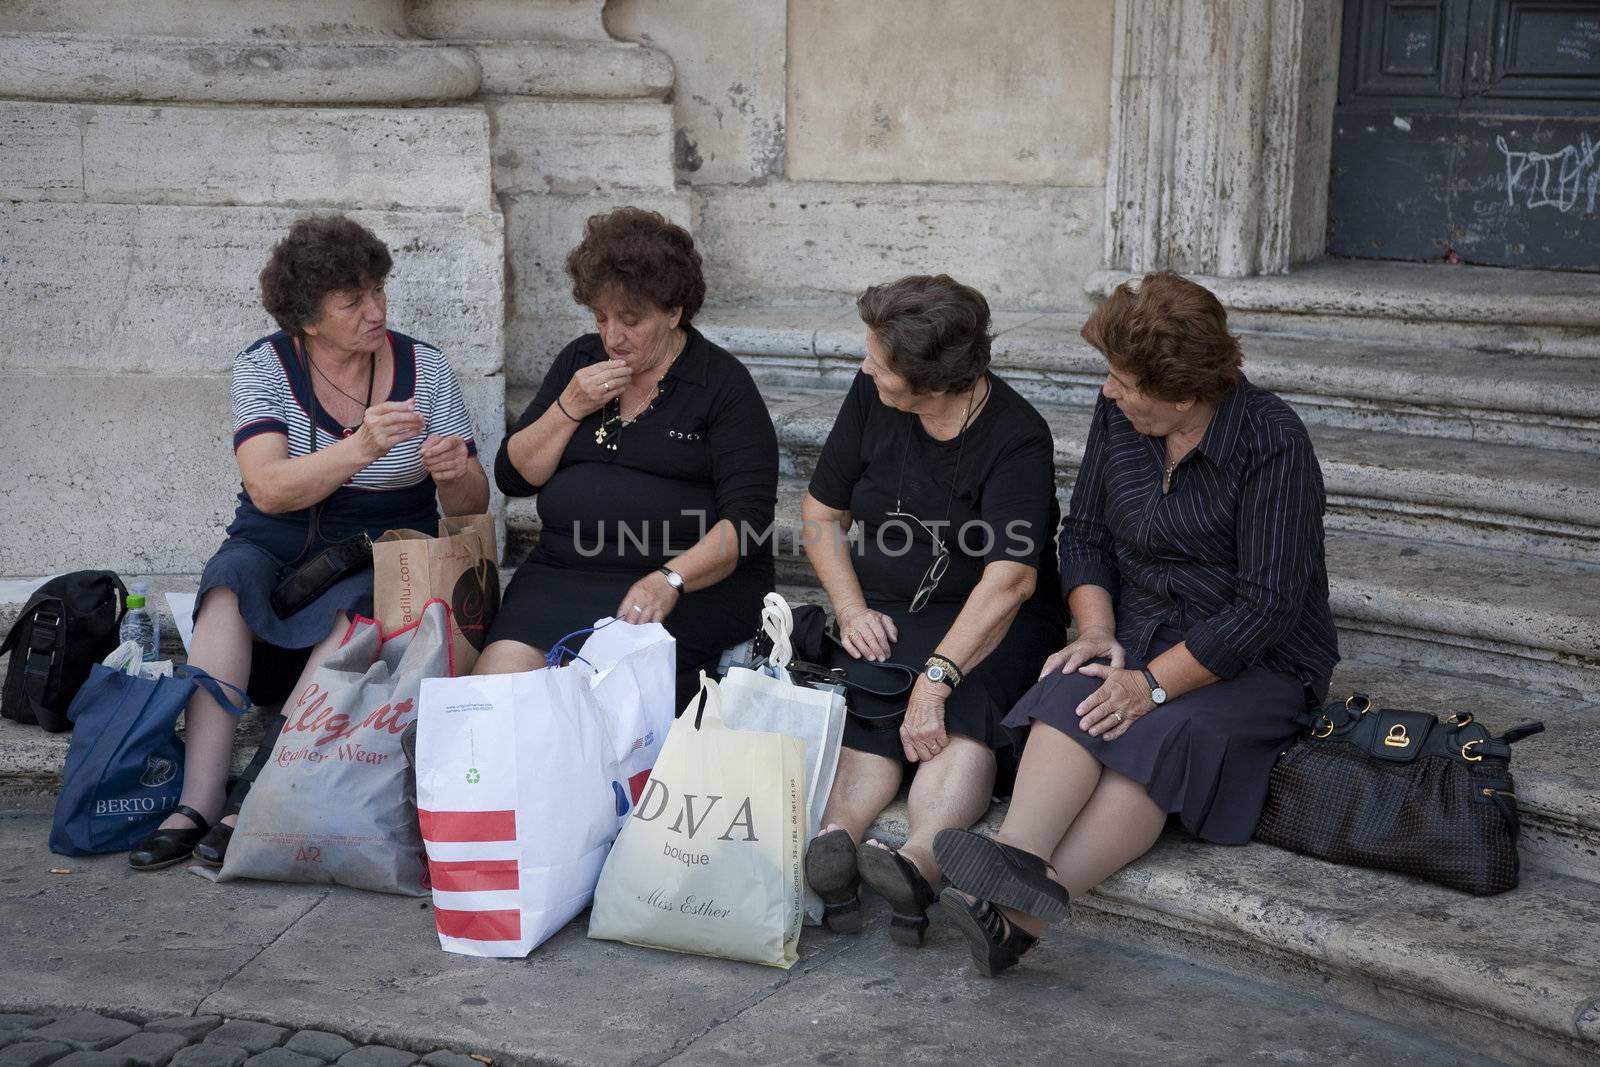 RESTING THE LEGS, ROME, Italy - SEPTEMBER 26, 2011: Senior ladies resting while waiting for the bus after heavy shopping in city.